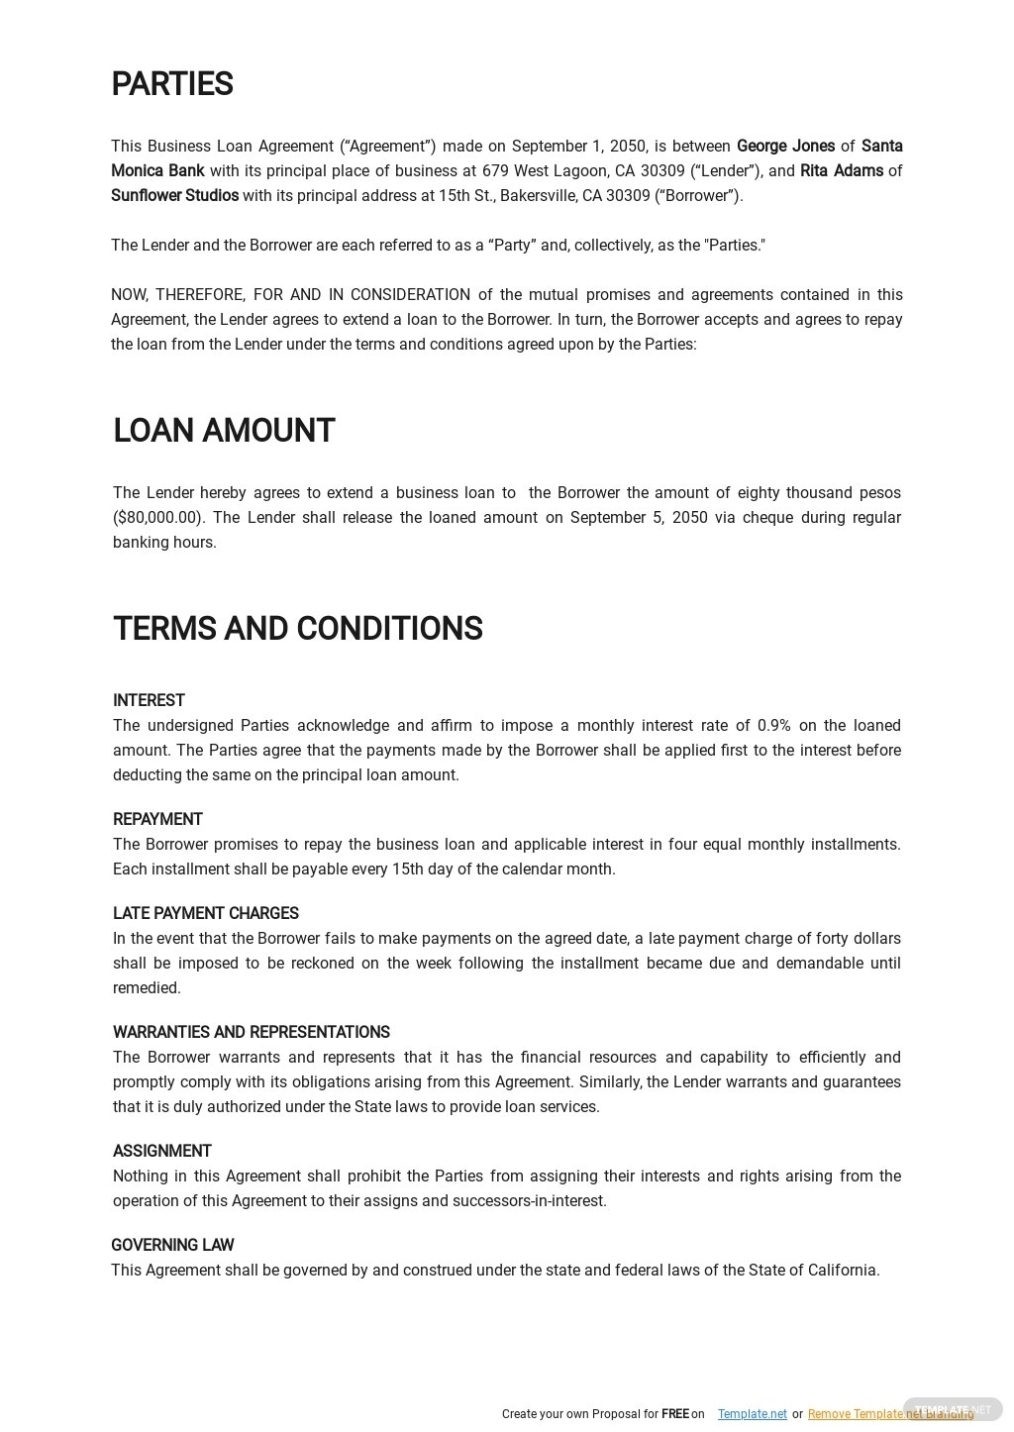 Free Basic Business Loan Agreement Template - Google Docs, Word Throughout Business Loan Agreement Template